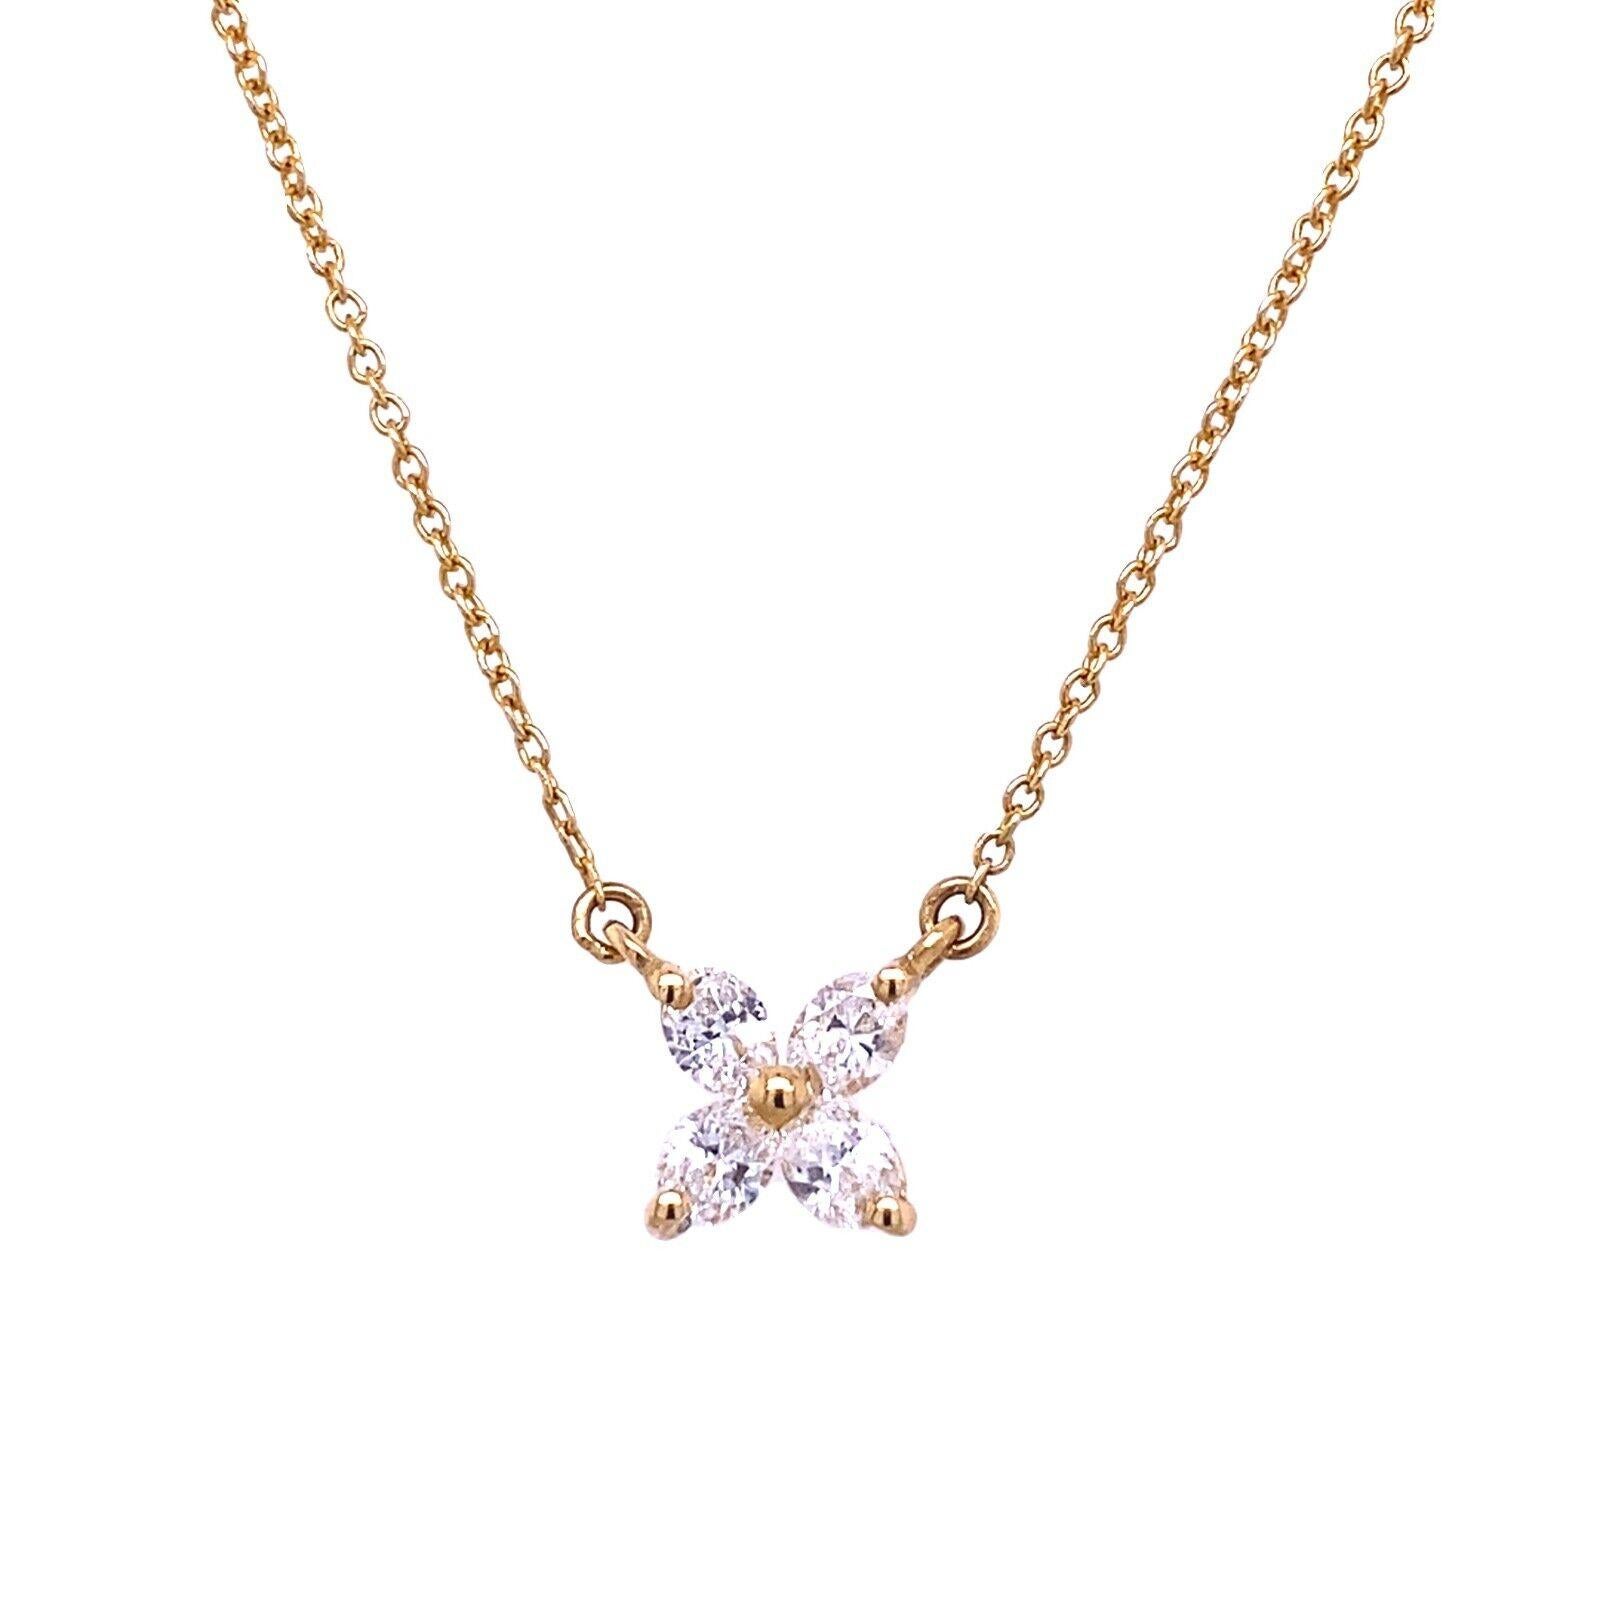 0.36ct F /VS Oval Diamond Flower Pendant Set in 18ct Yellow Gold

This gorgeous Diamond pendant is a real flower of beauty, shining with 4 Oval shape VS-grade Diamonds that come together to form an exquisite flower. The pendant is set in 18ct Yellow